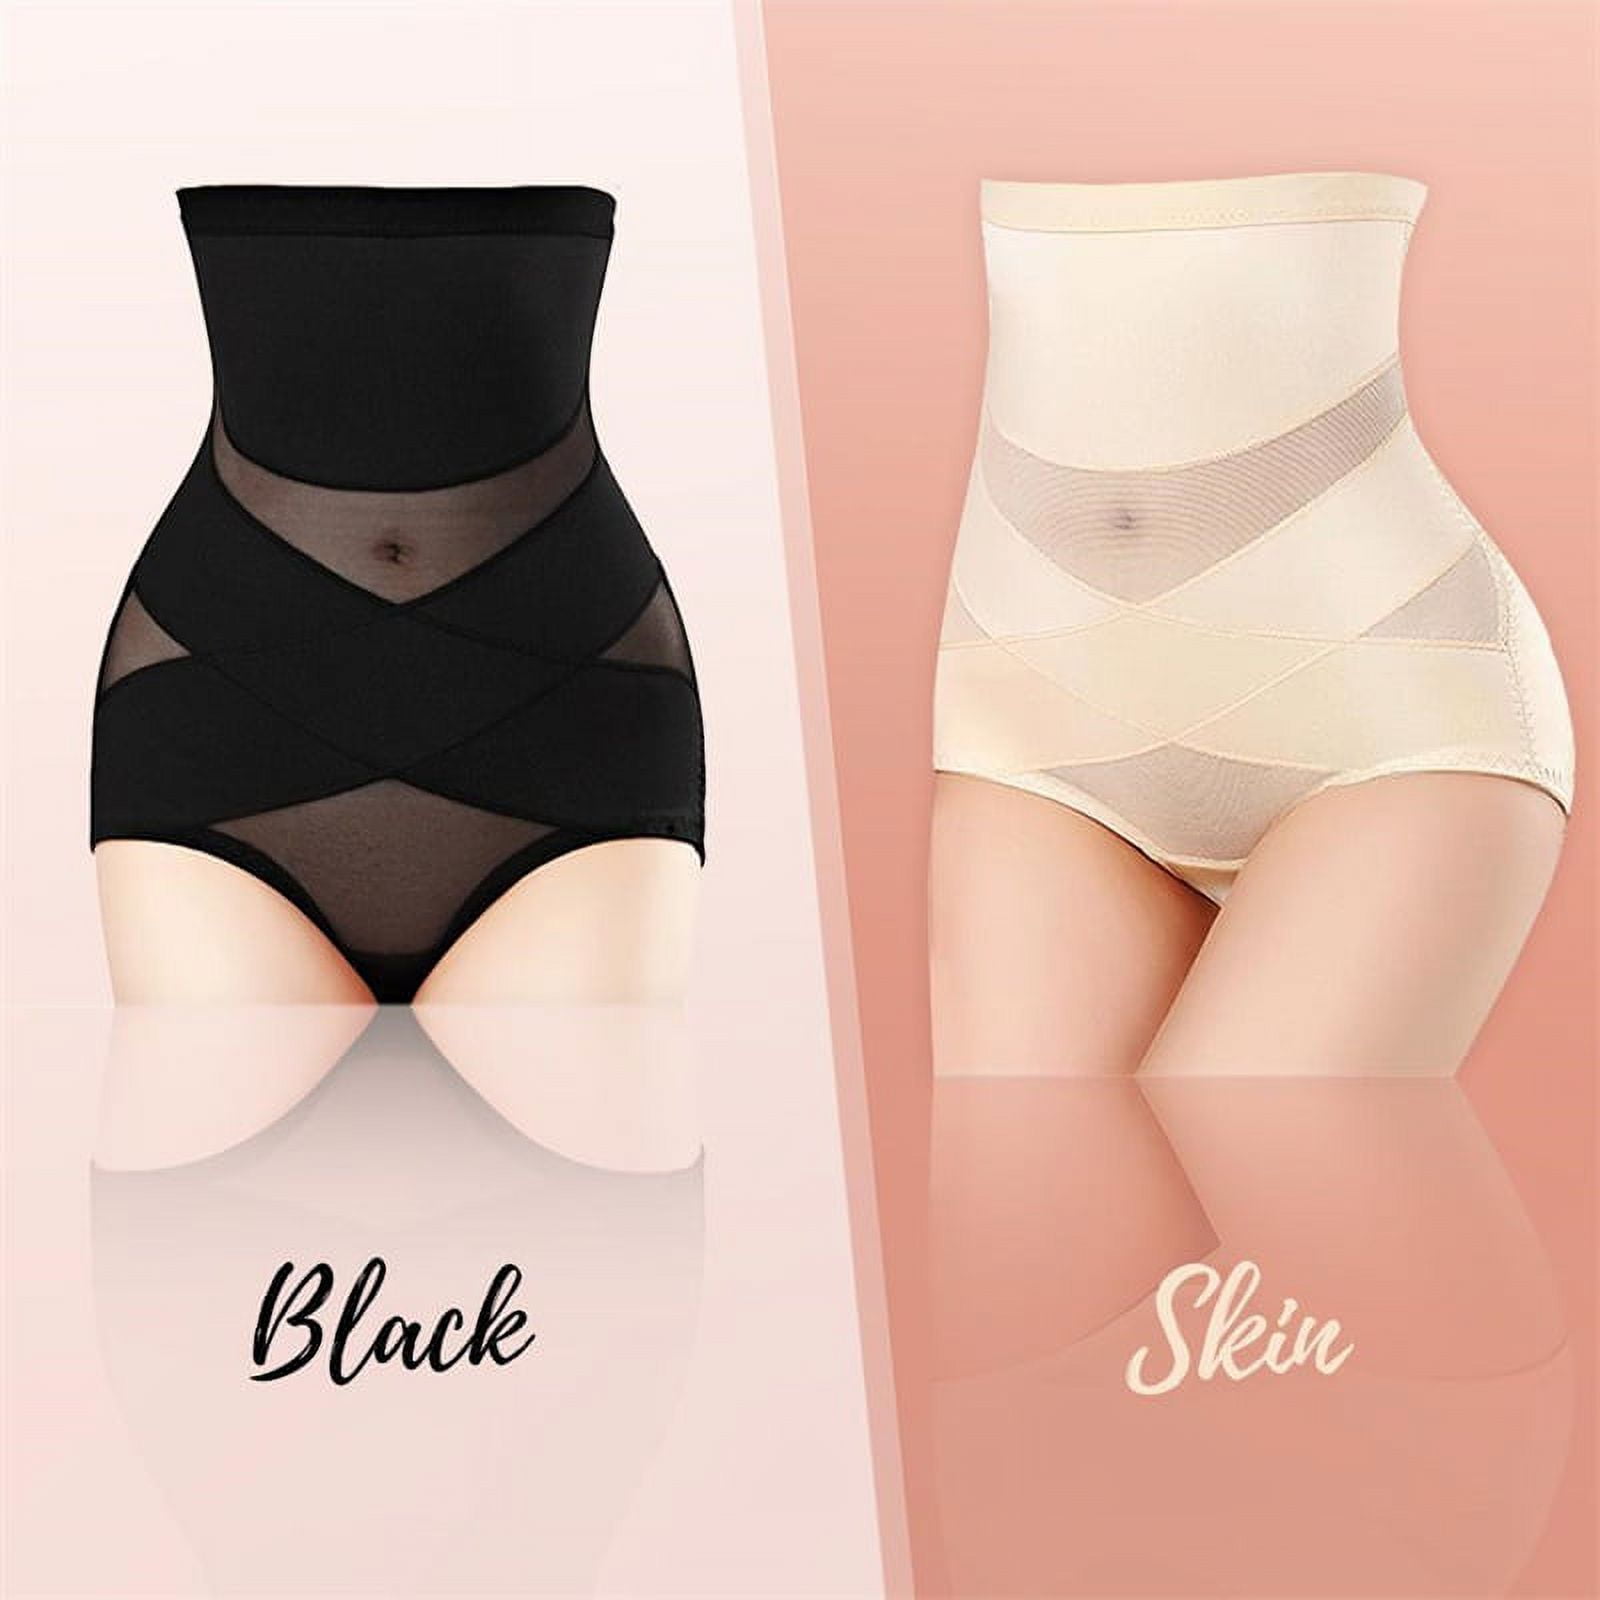 Cross Compression Abs Shaping Pants Women High Waist Panties Slimming Body  Shaper Shapewear Knickers Tummy Control Corset Girdle From Fandeng, $16.91